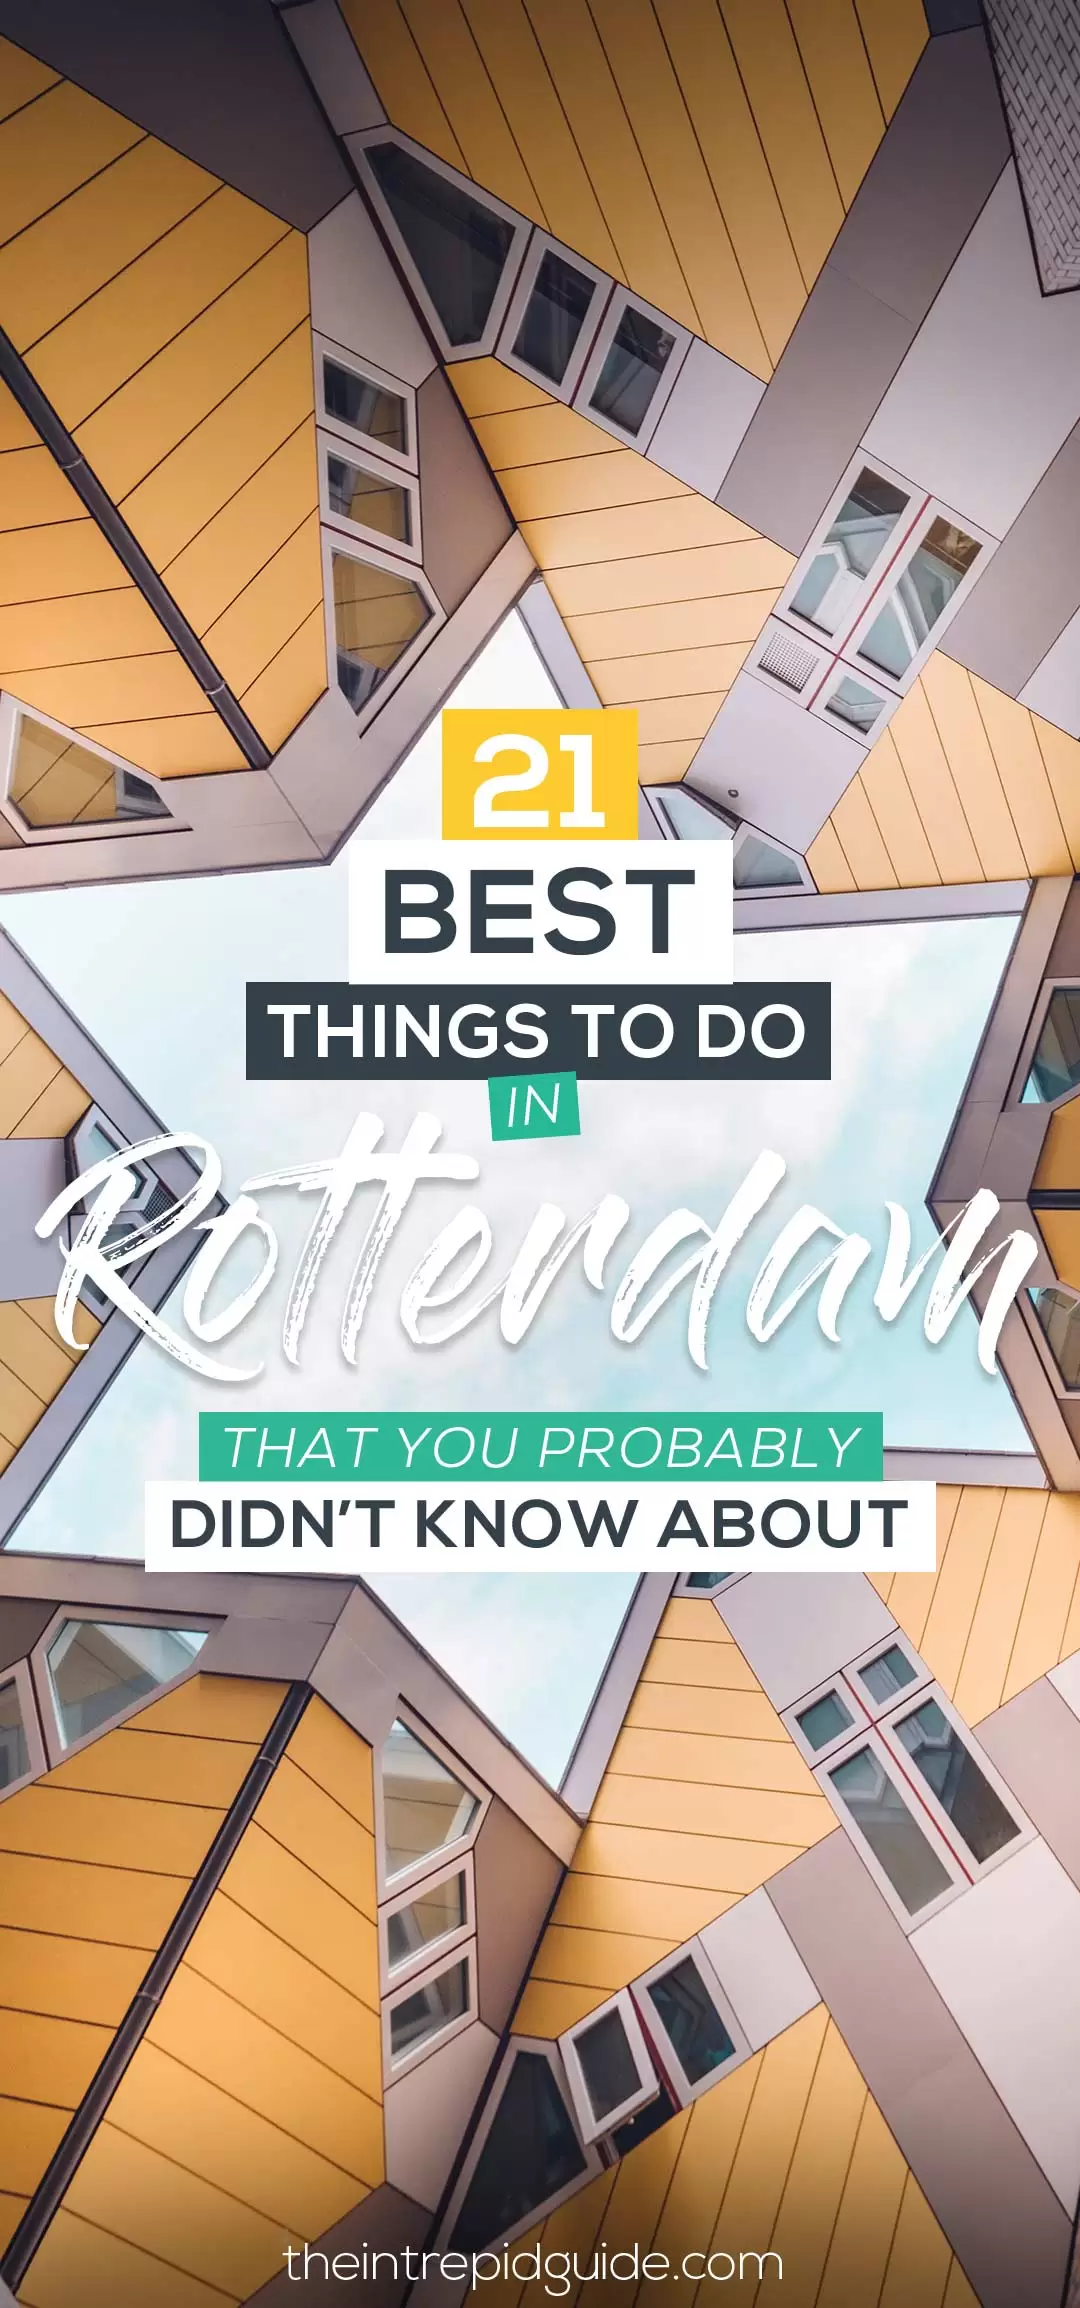 21 Best Things to Do in Rotterdam That You Probably Didn't Know About